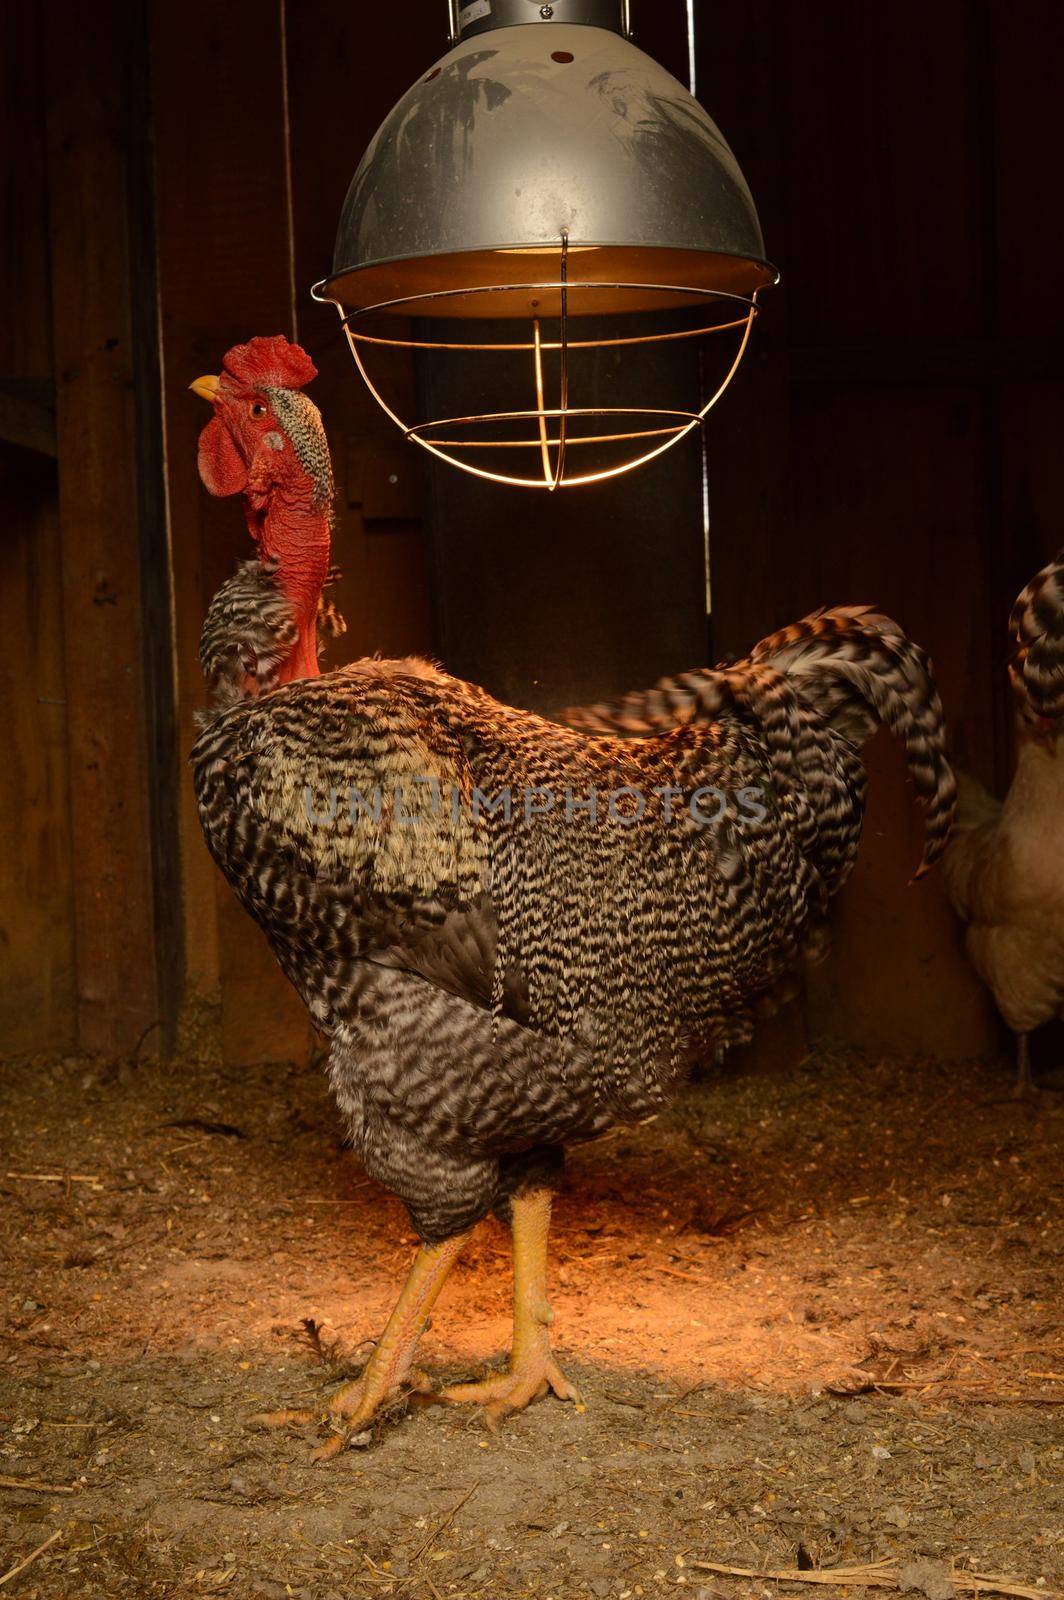 A full view of a domestic Turken inside the chicken coop.